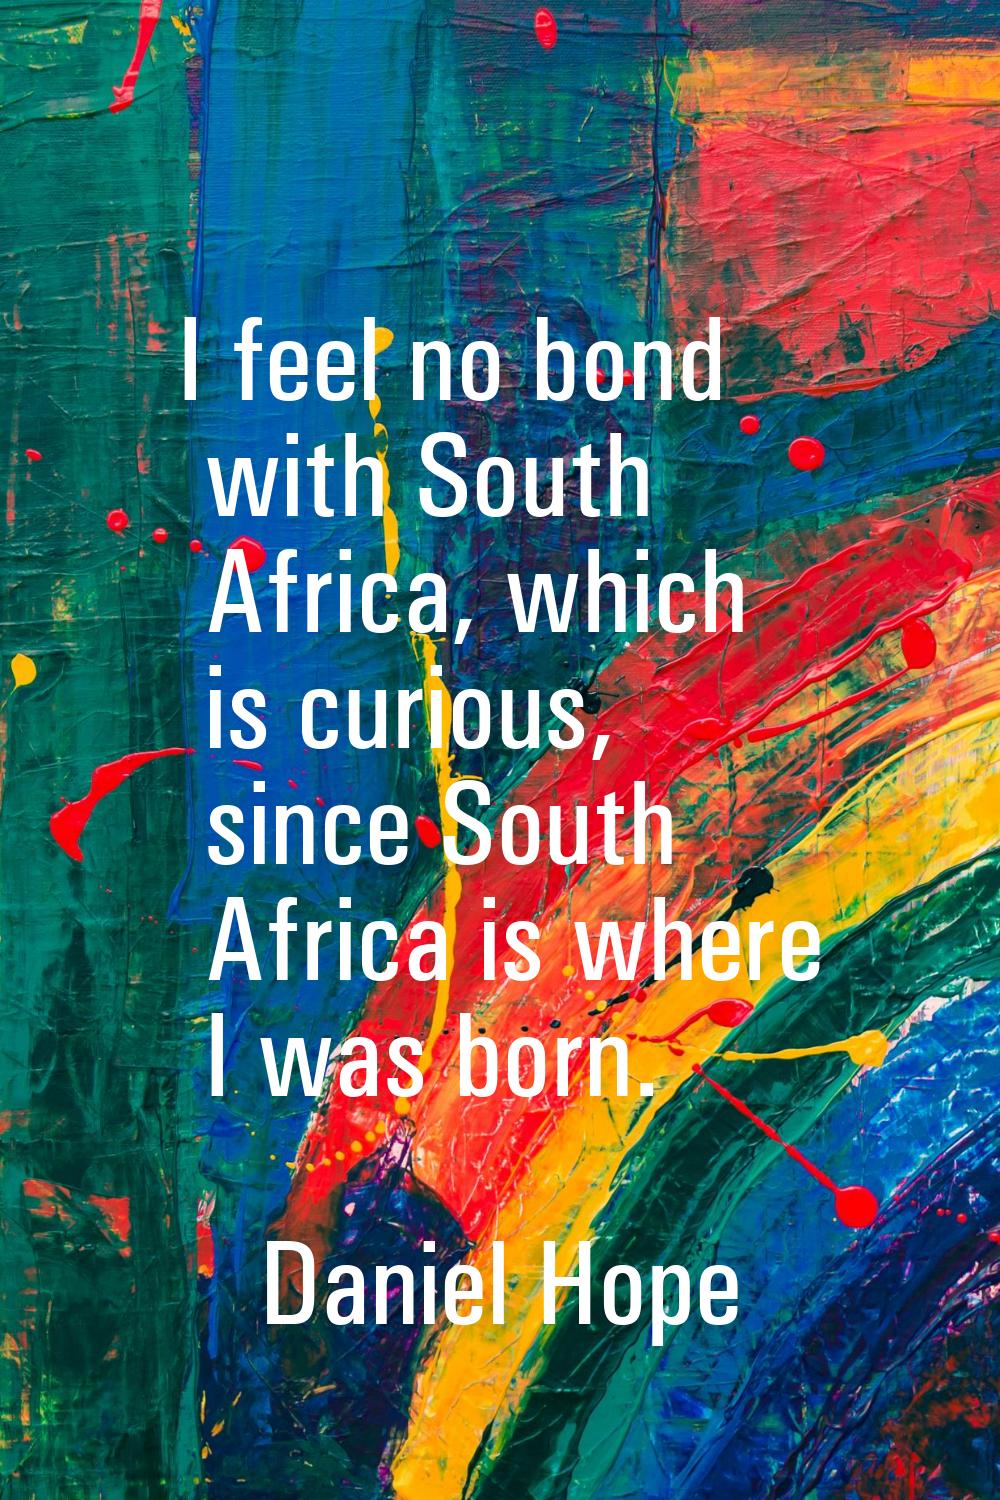 I feel no bond with South Africa, which is curious, since South Africa is where I was born.